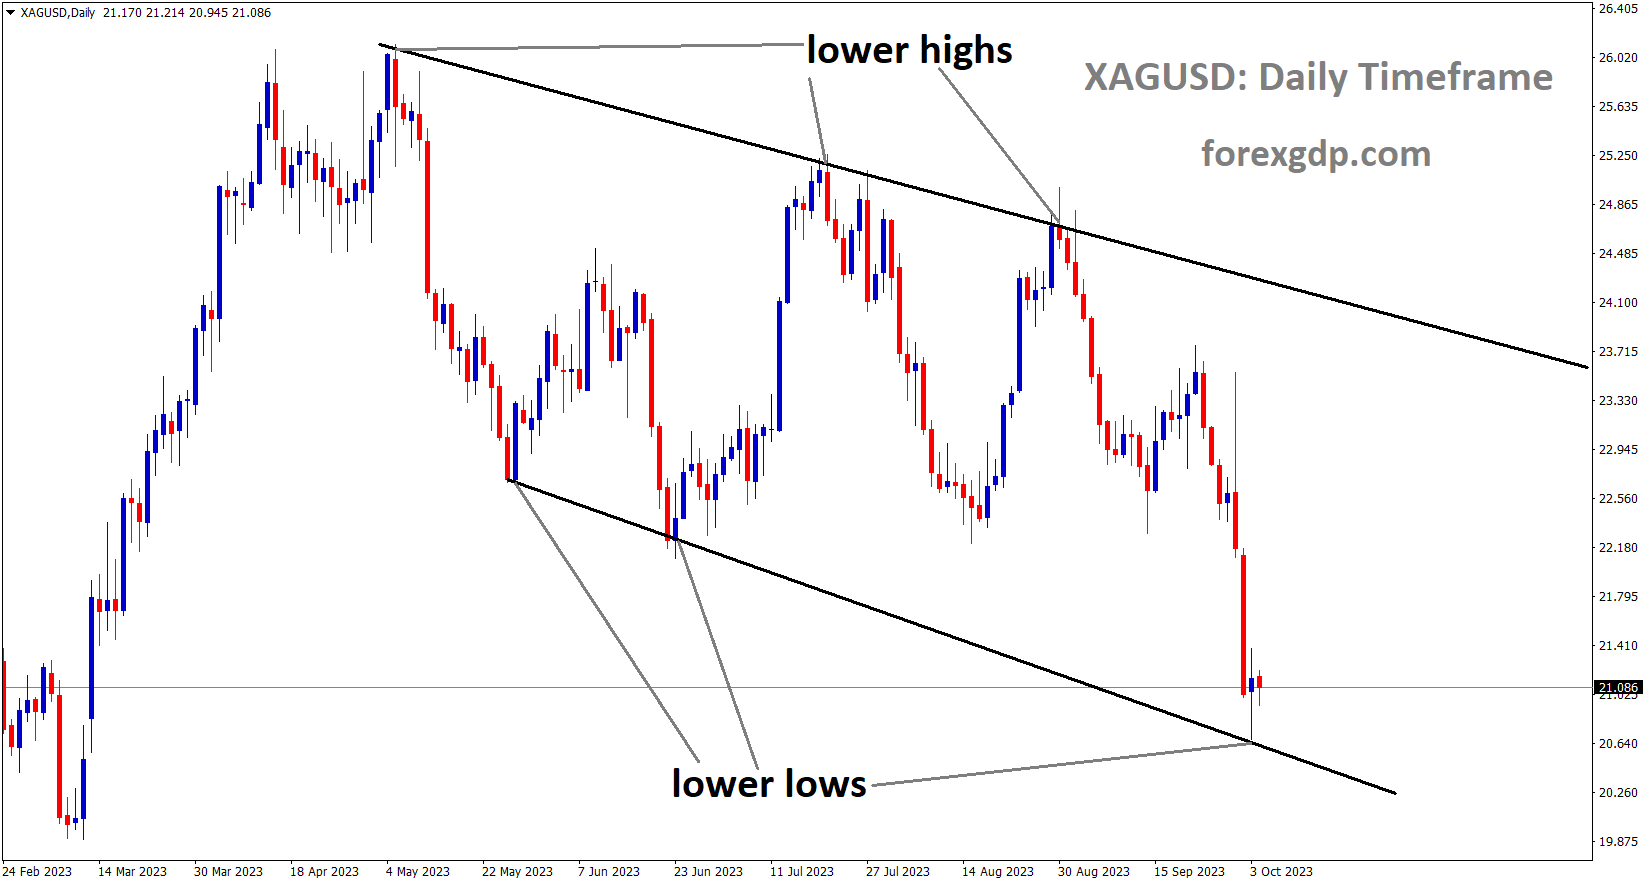 XAGUSD Silver price is moving in the Descending channel and the market has reached the lowered low area of the channel